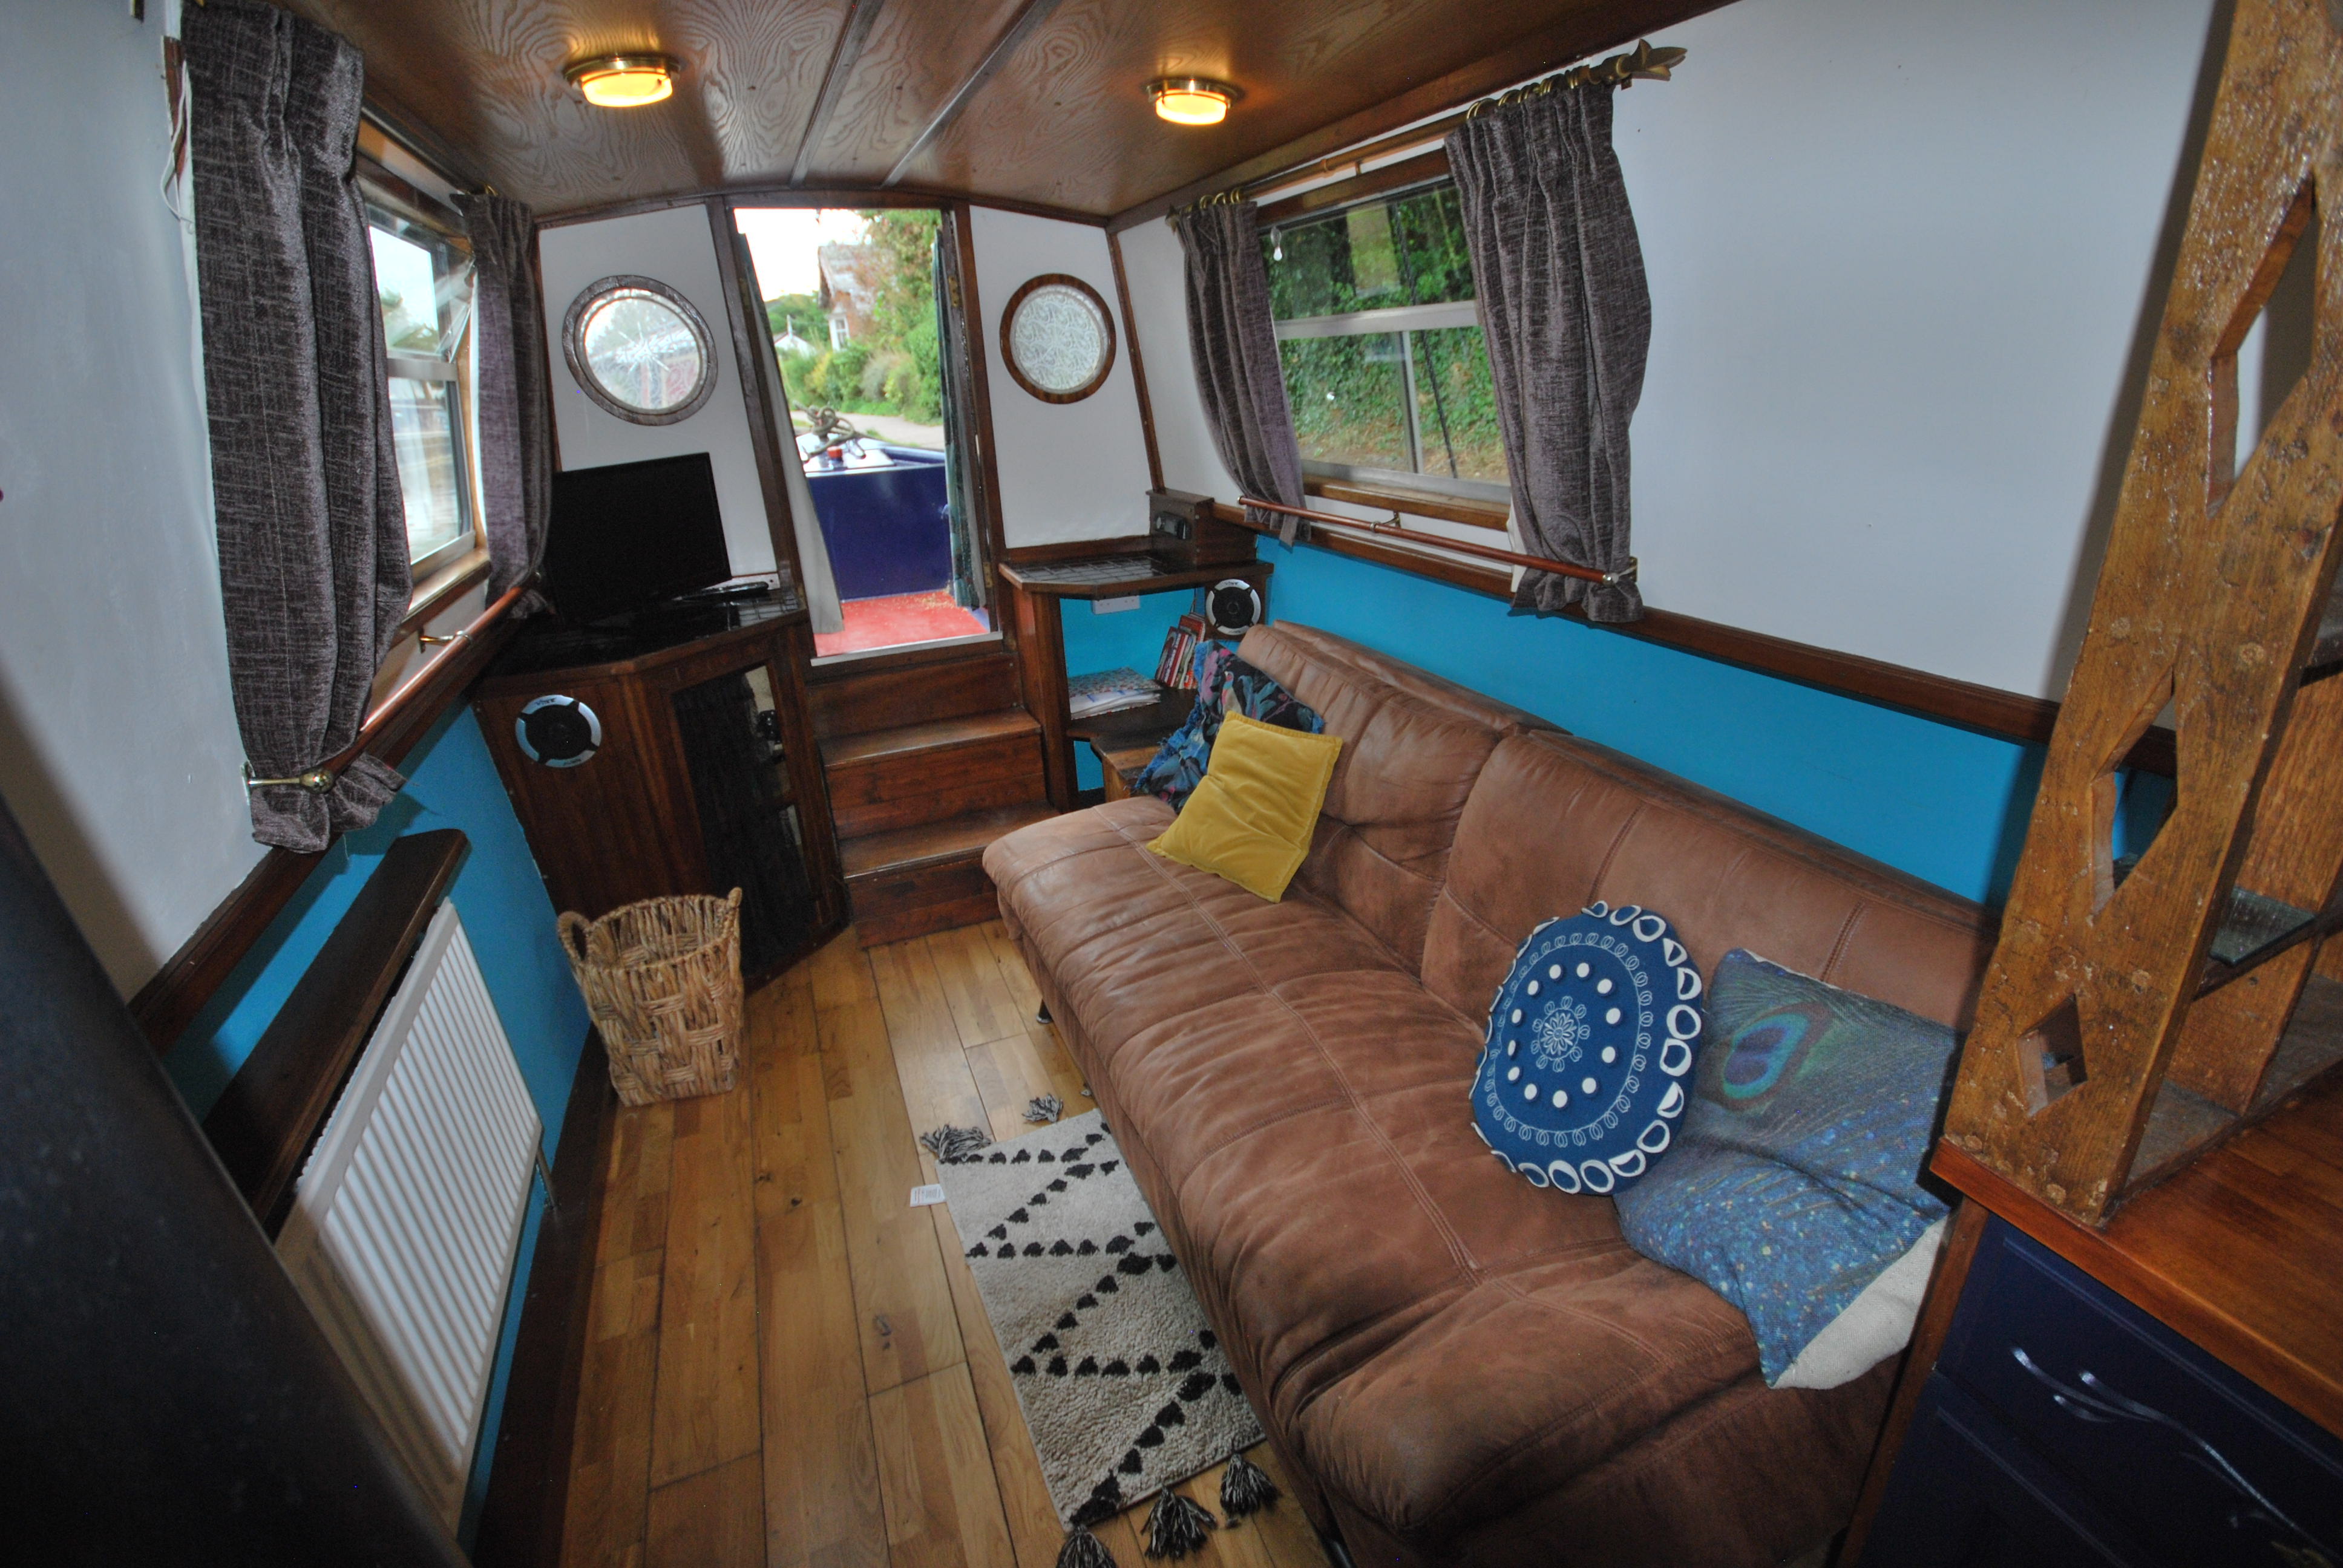 Luvly Jubbly - 56ft Cruiser Stern Liveaboard Narrowboat - For Sale 10